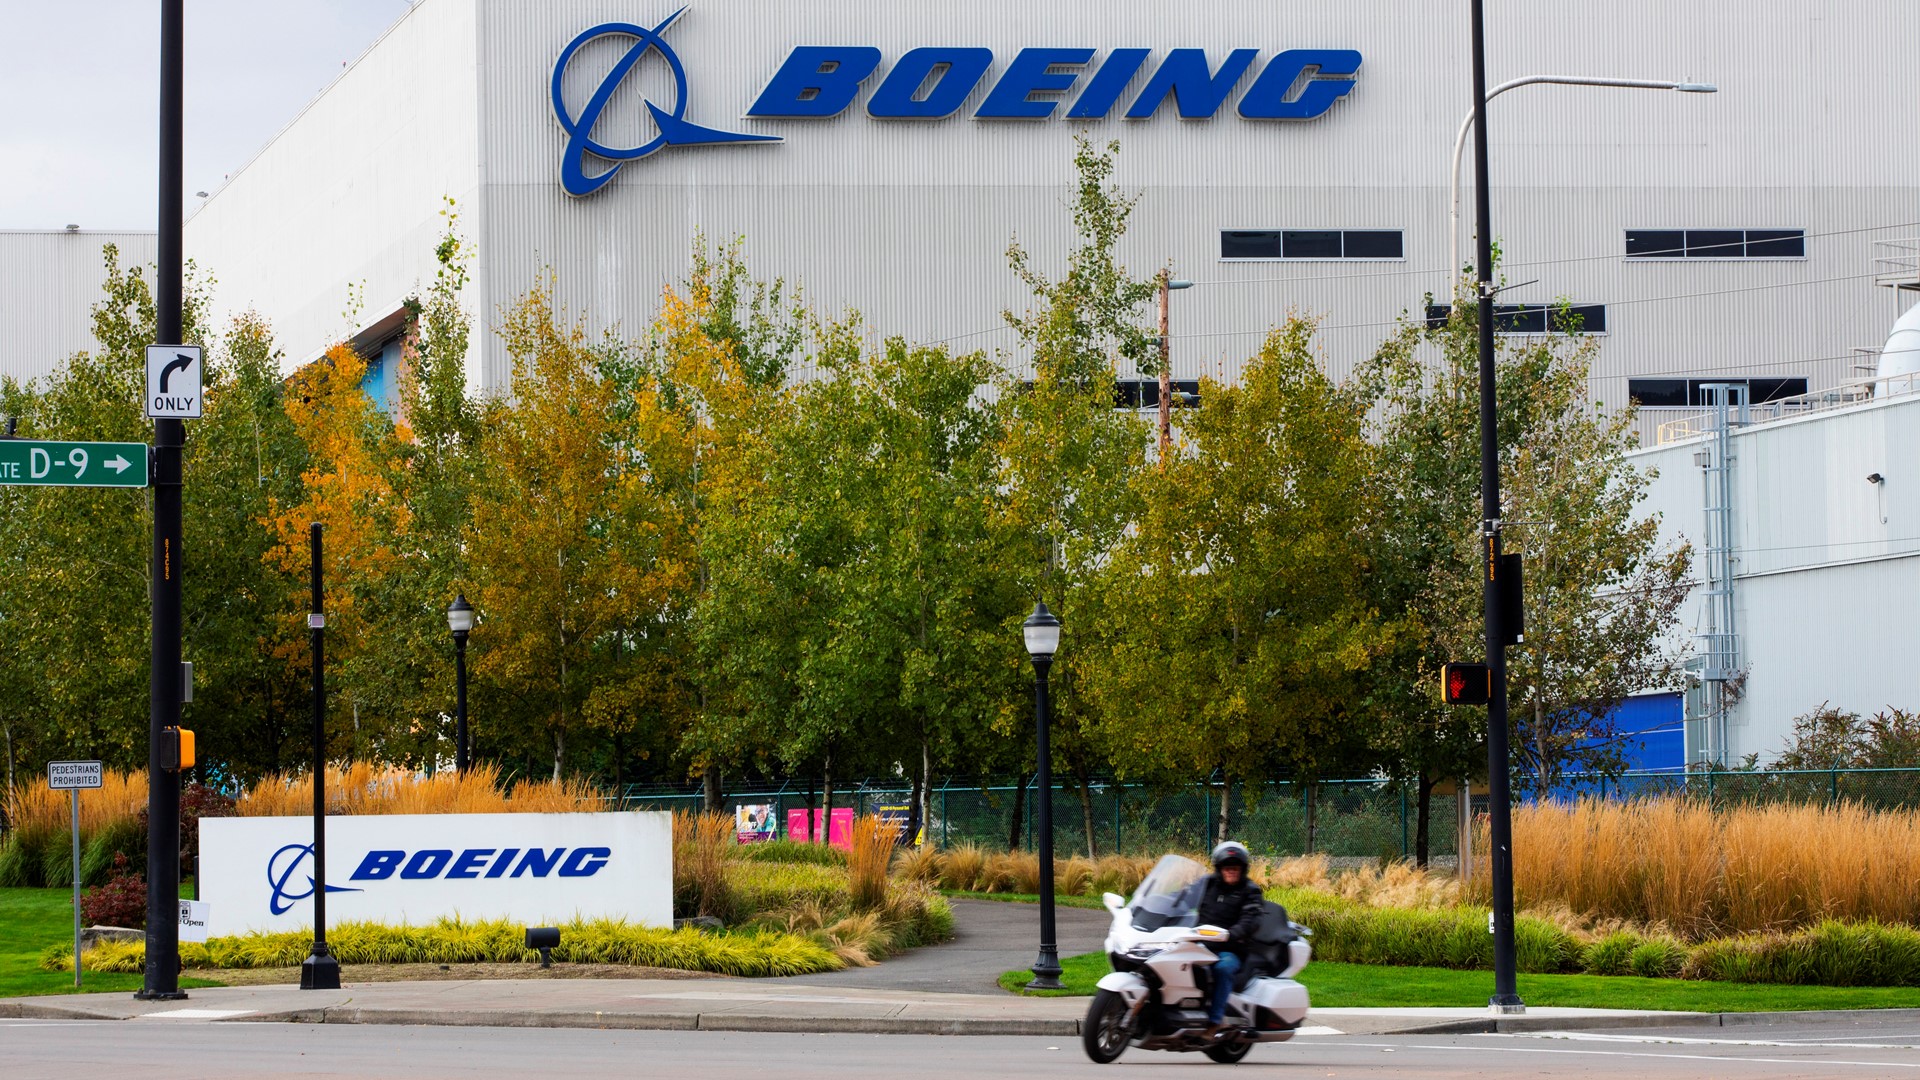 Boeing earned $567 million in the second quarter, compared with a $2.4 billion loss a year ago